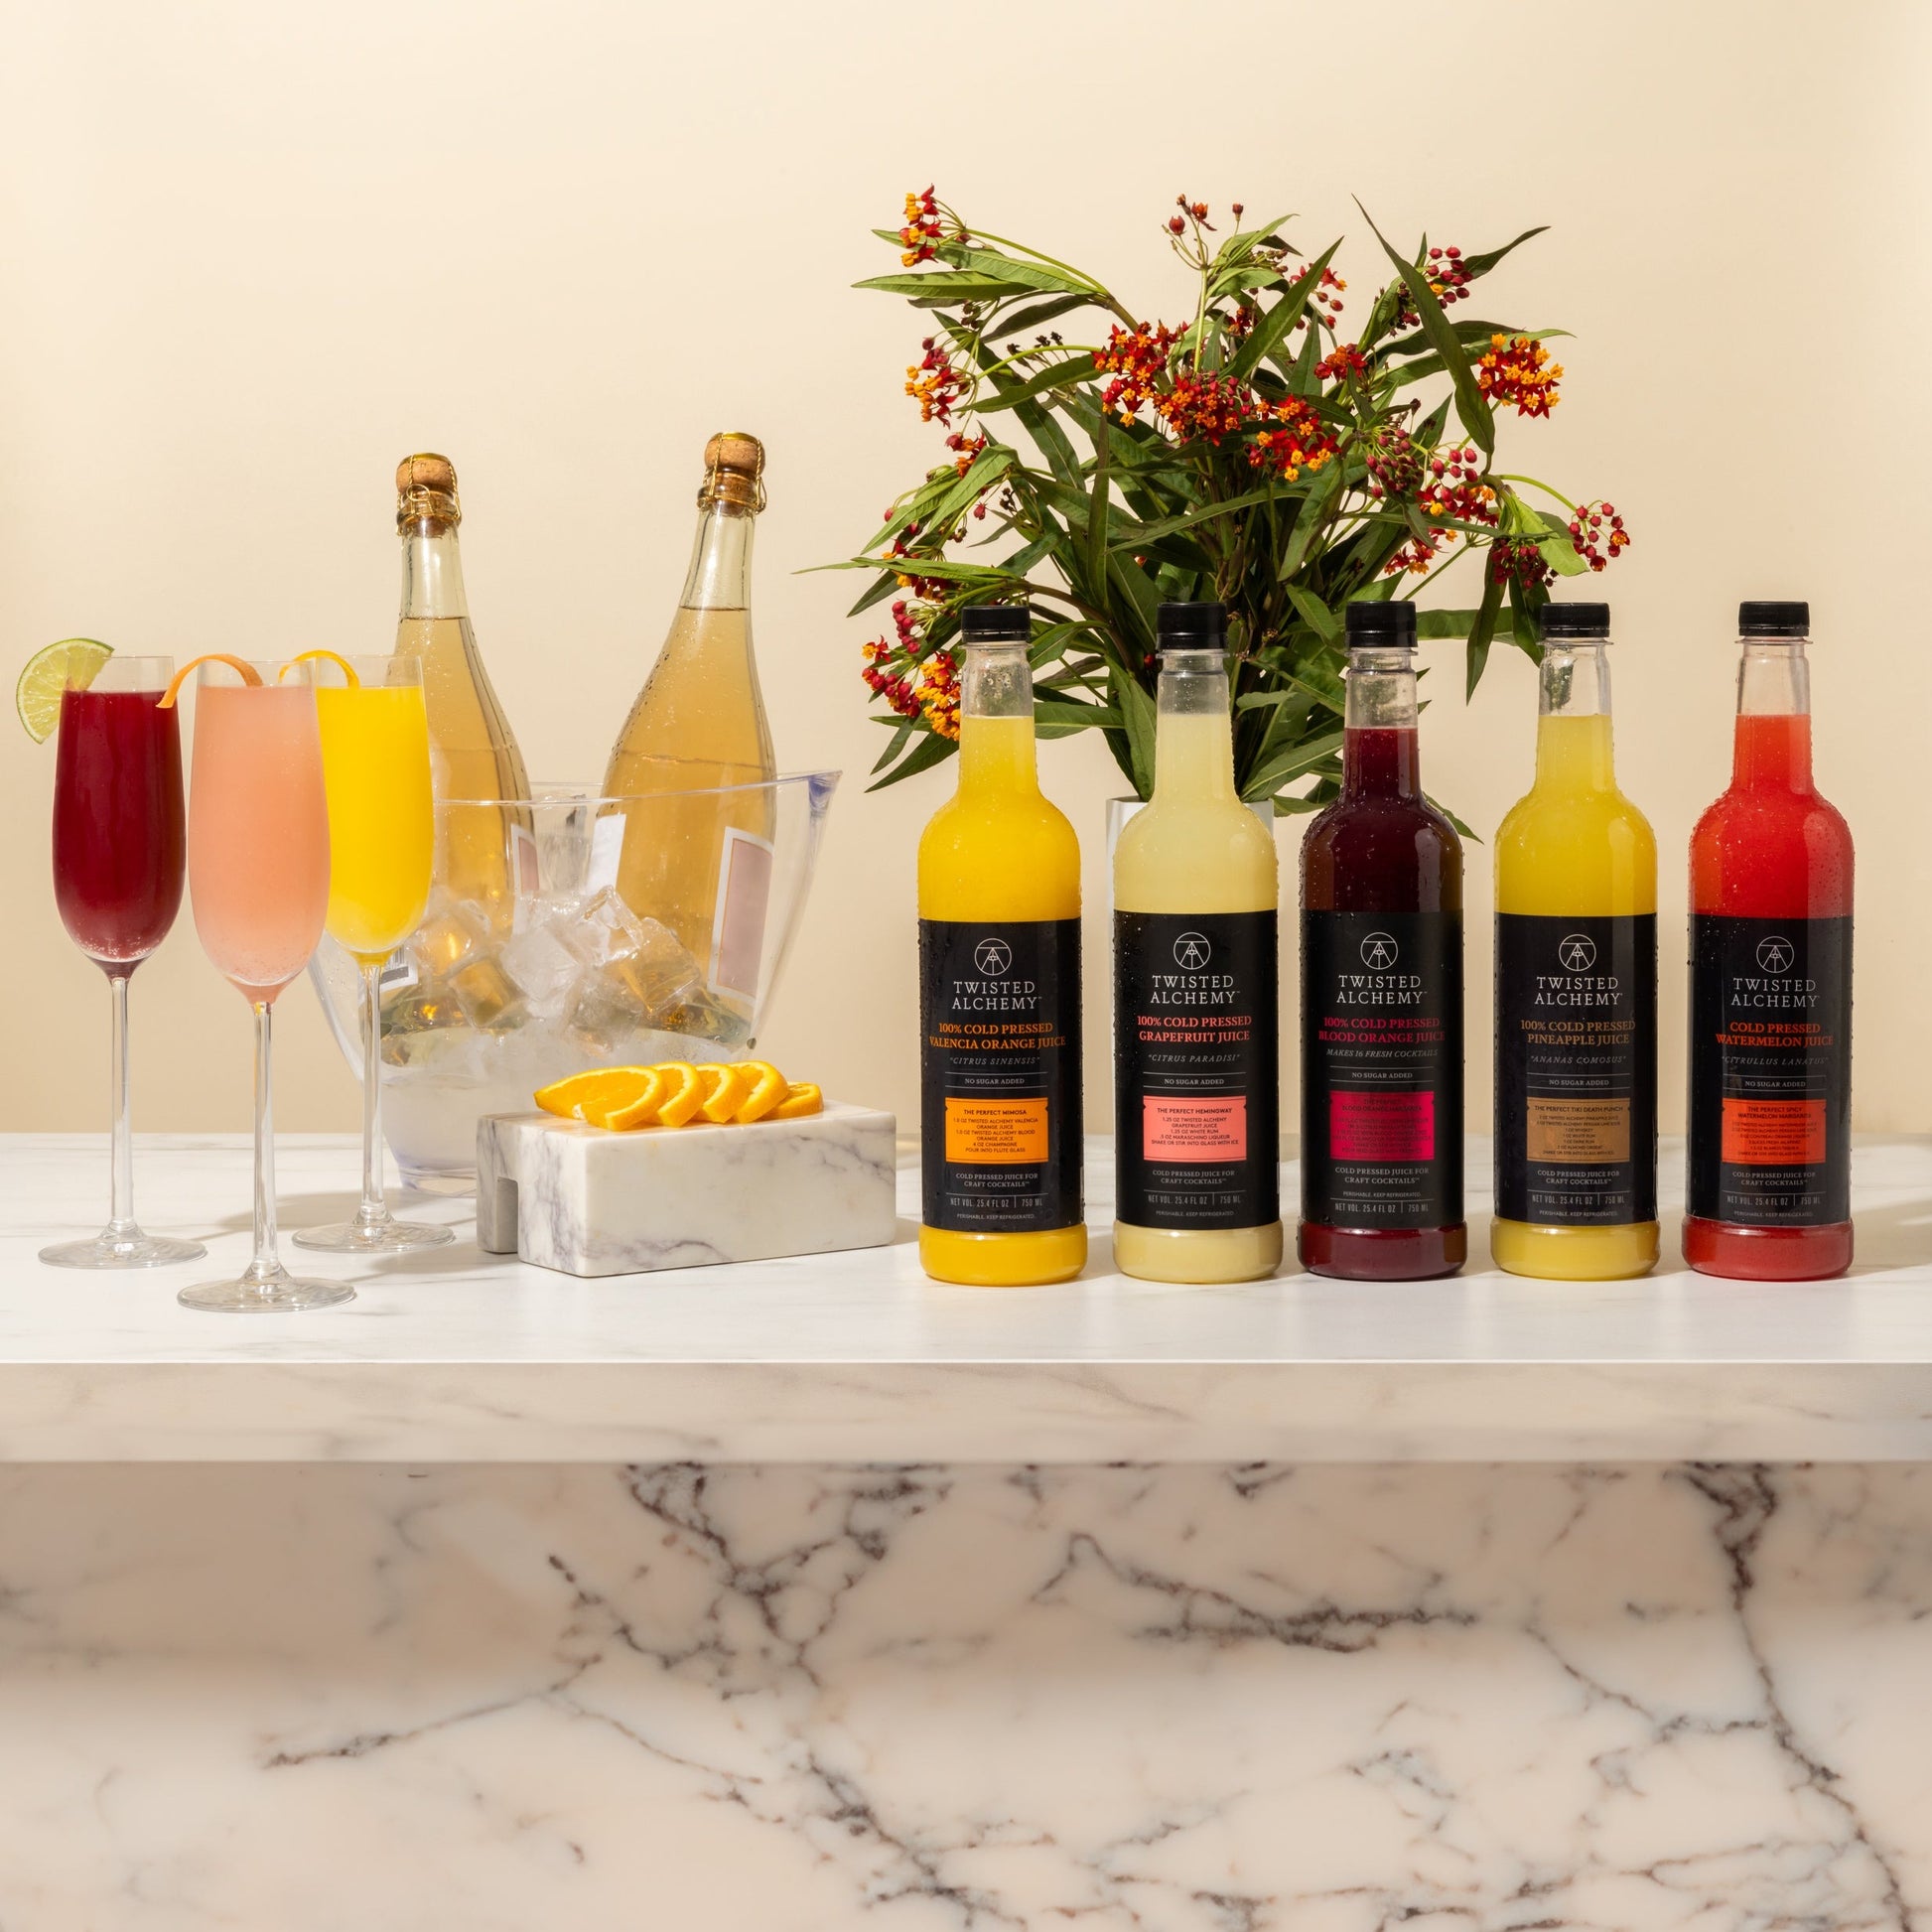 How To Set Up a Festive Mimosa Bar